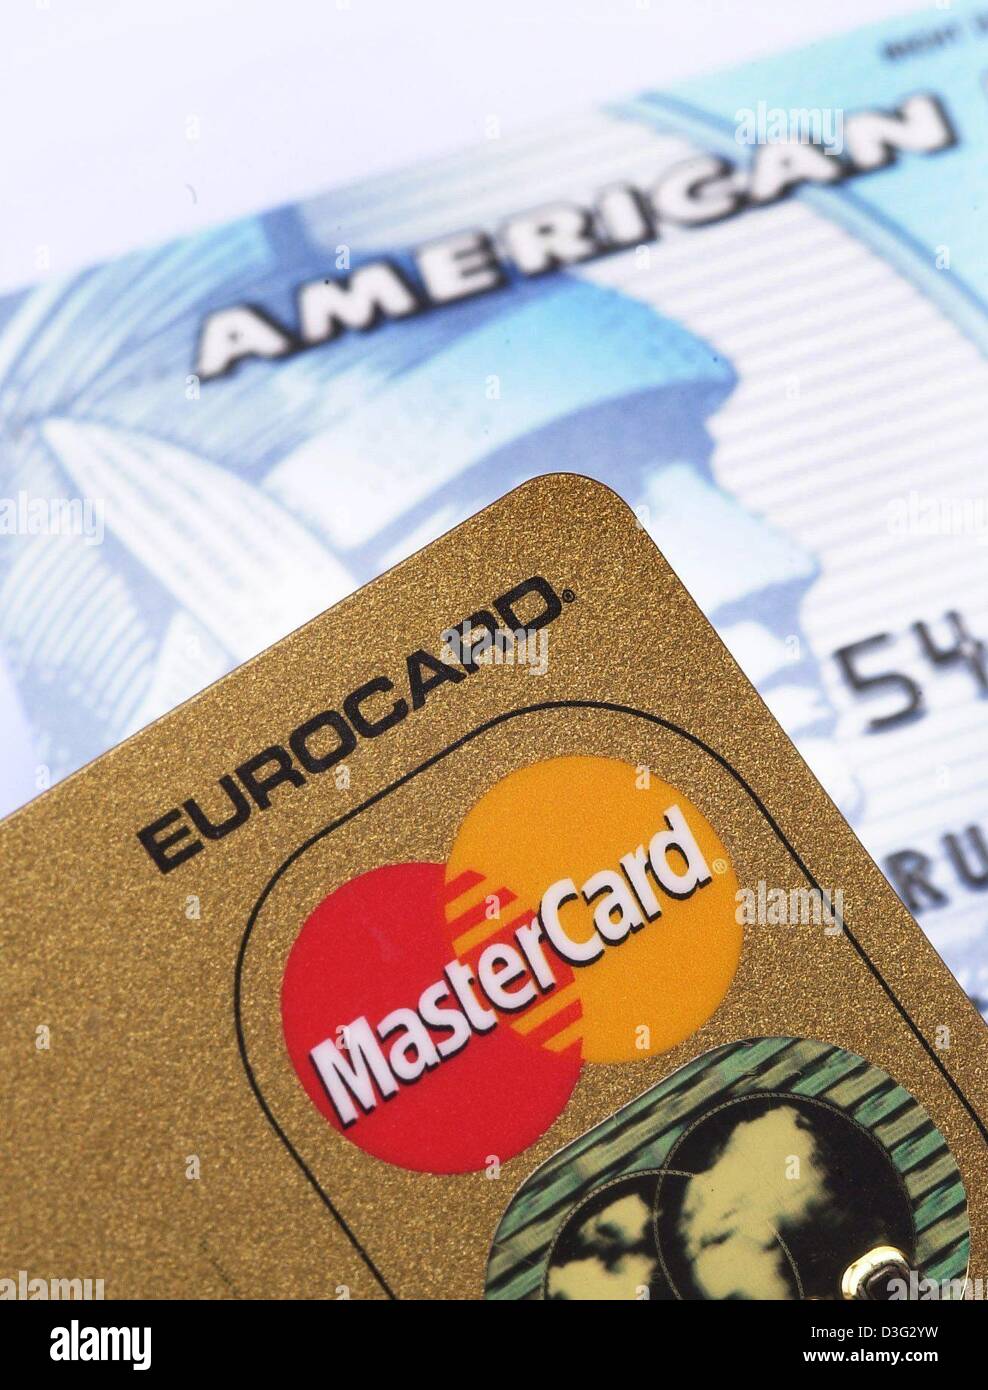 (dpa) - A Eurocard and an American Express credit card are photographed on a table in Hamburg, 4 March 2003. To get a credit card, one has to be at least 18 years old and have a steady income. Credit cards are becoming more and more popular in Germany. Stock Photo